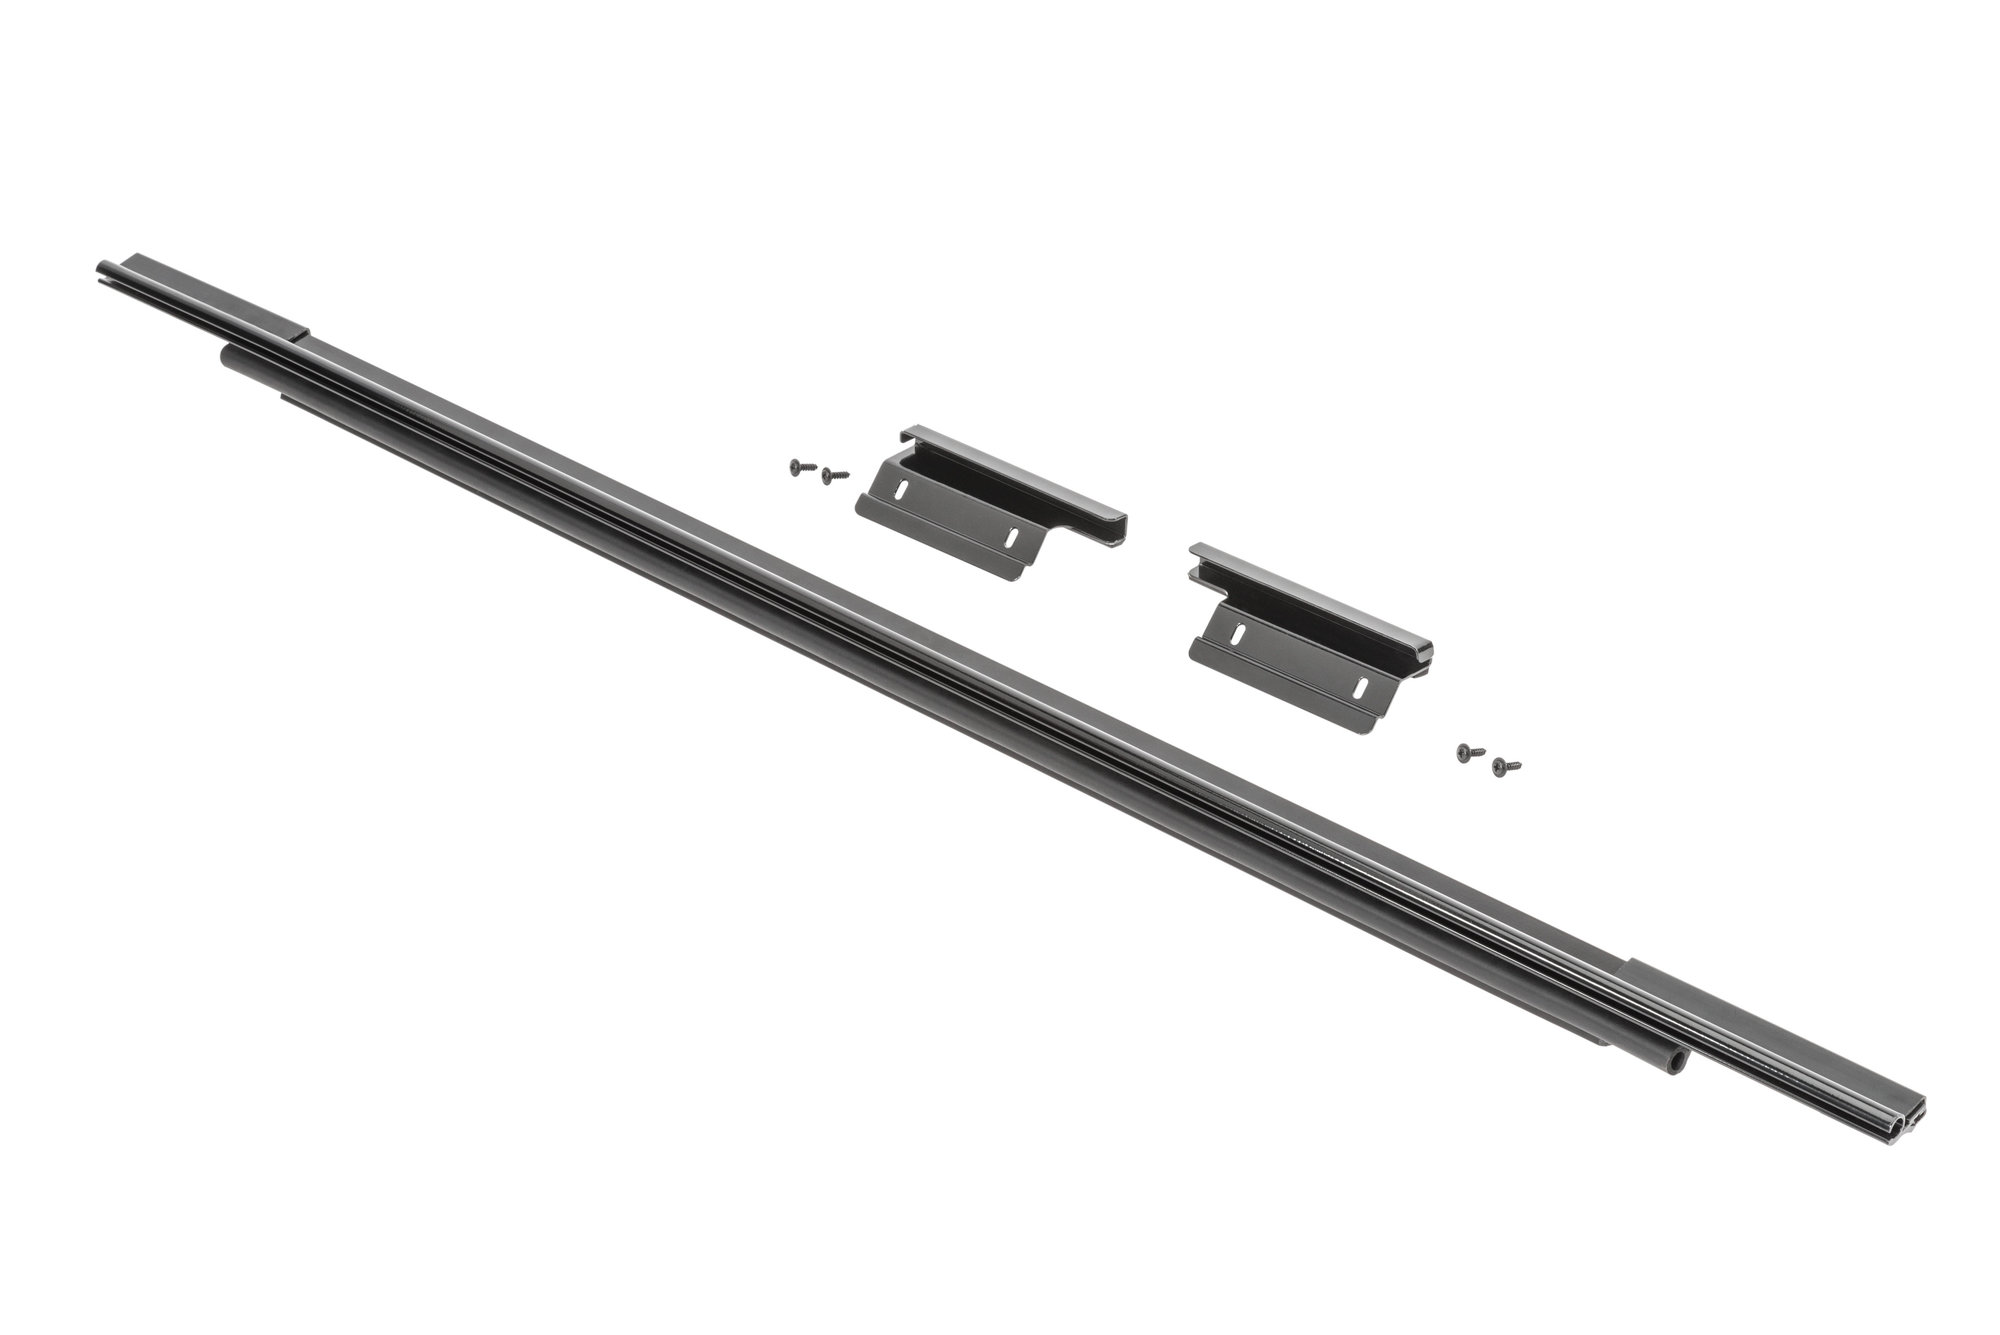 Mastertop Tailgate Bar Kit For 87 06 Jeep Wrangler Yj Tj And Unlimited